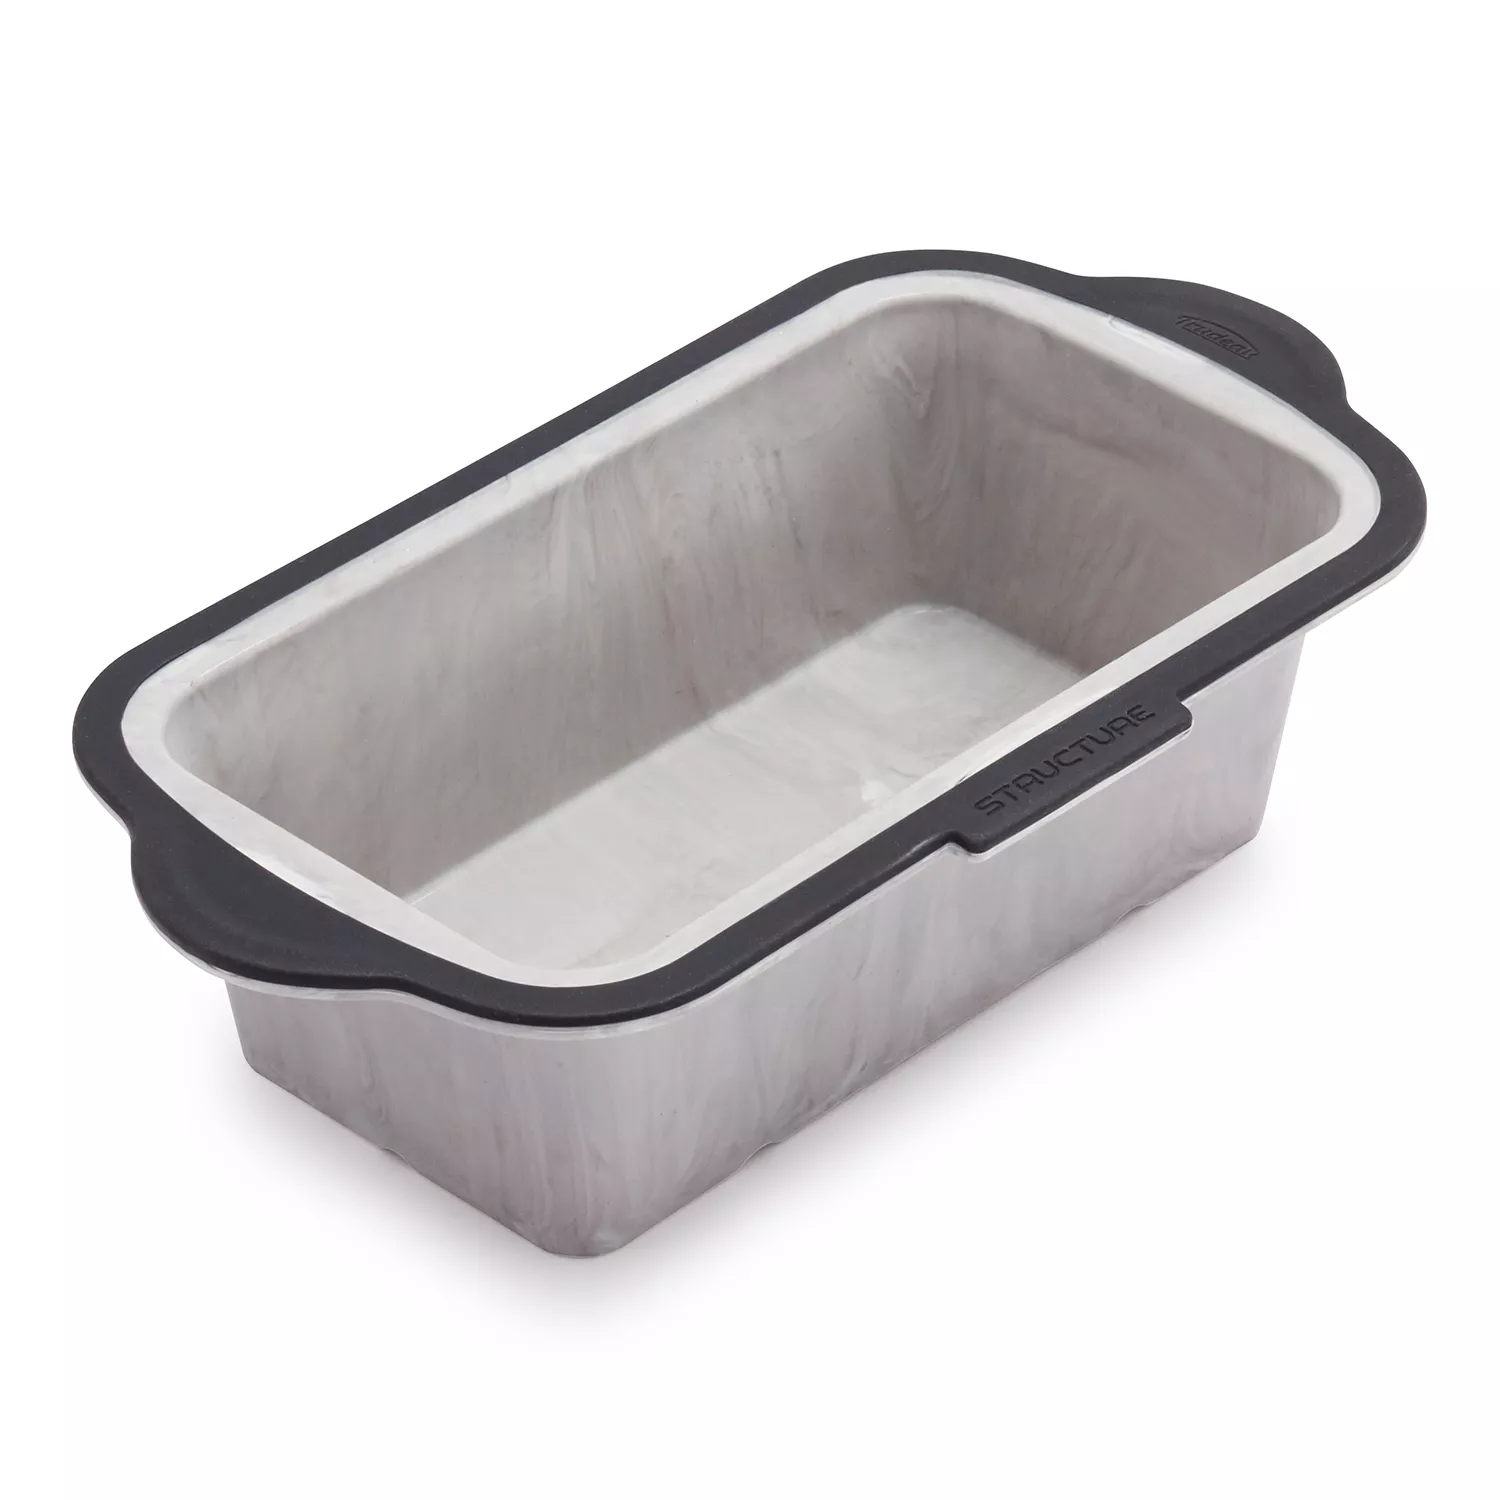 Trudeau Structure Silicone Pro Standard Loaf Pan